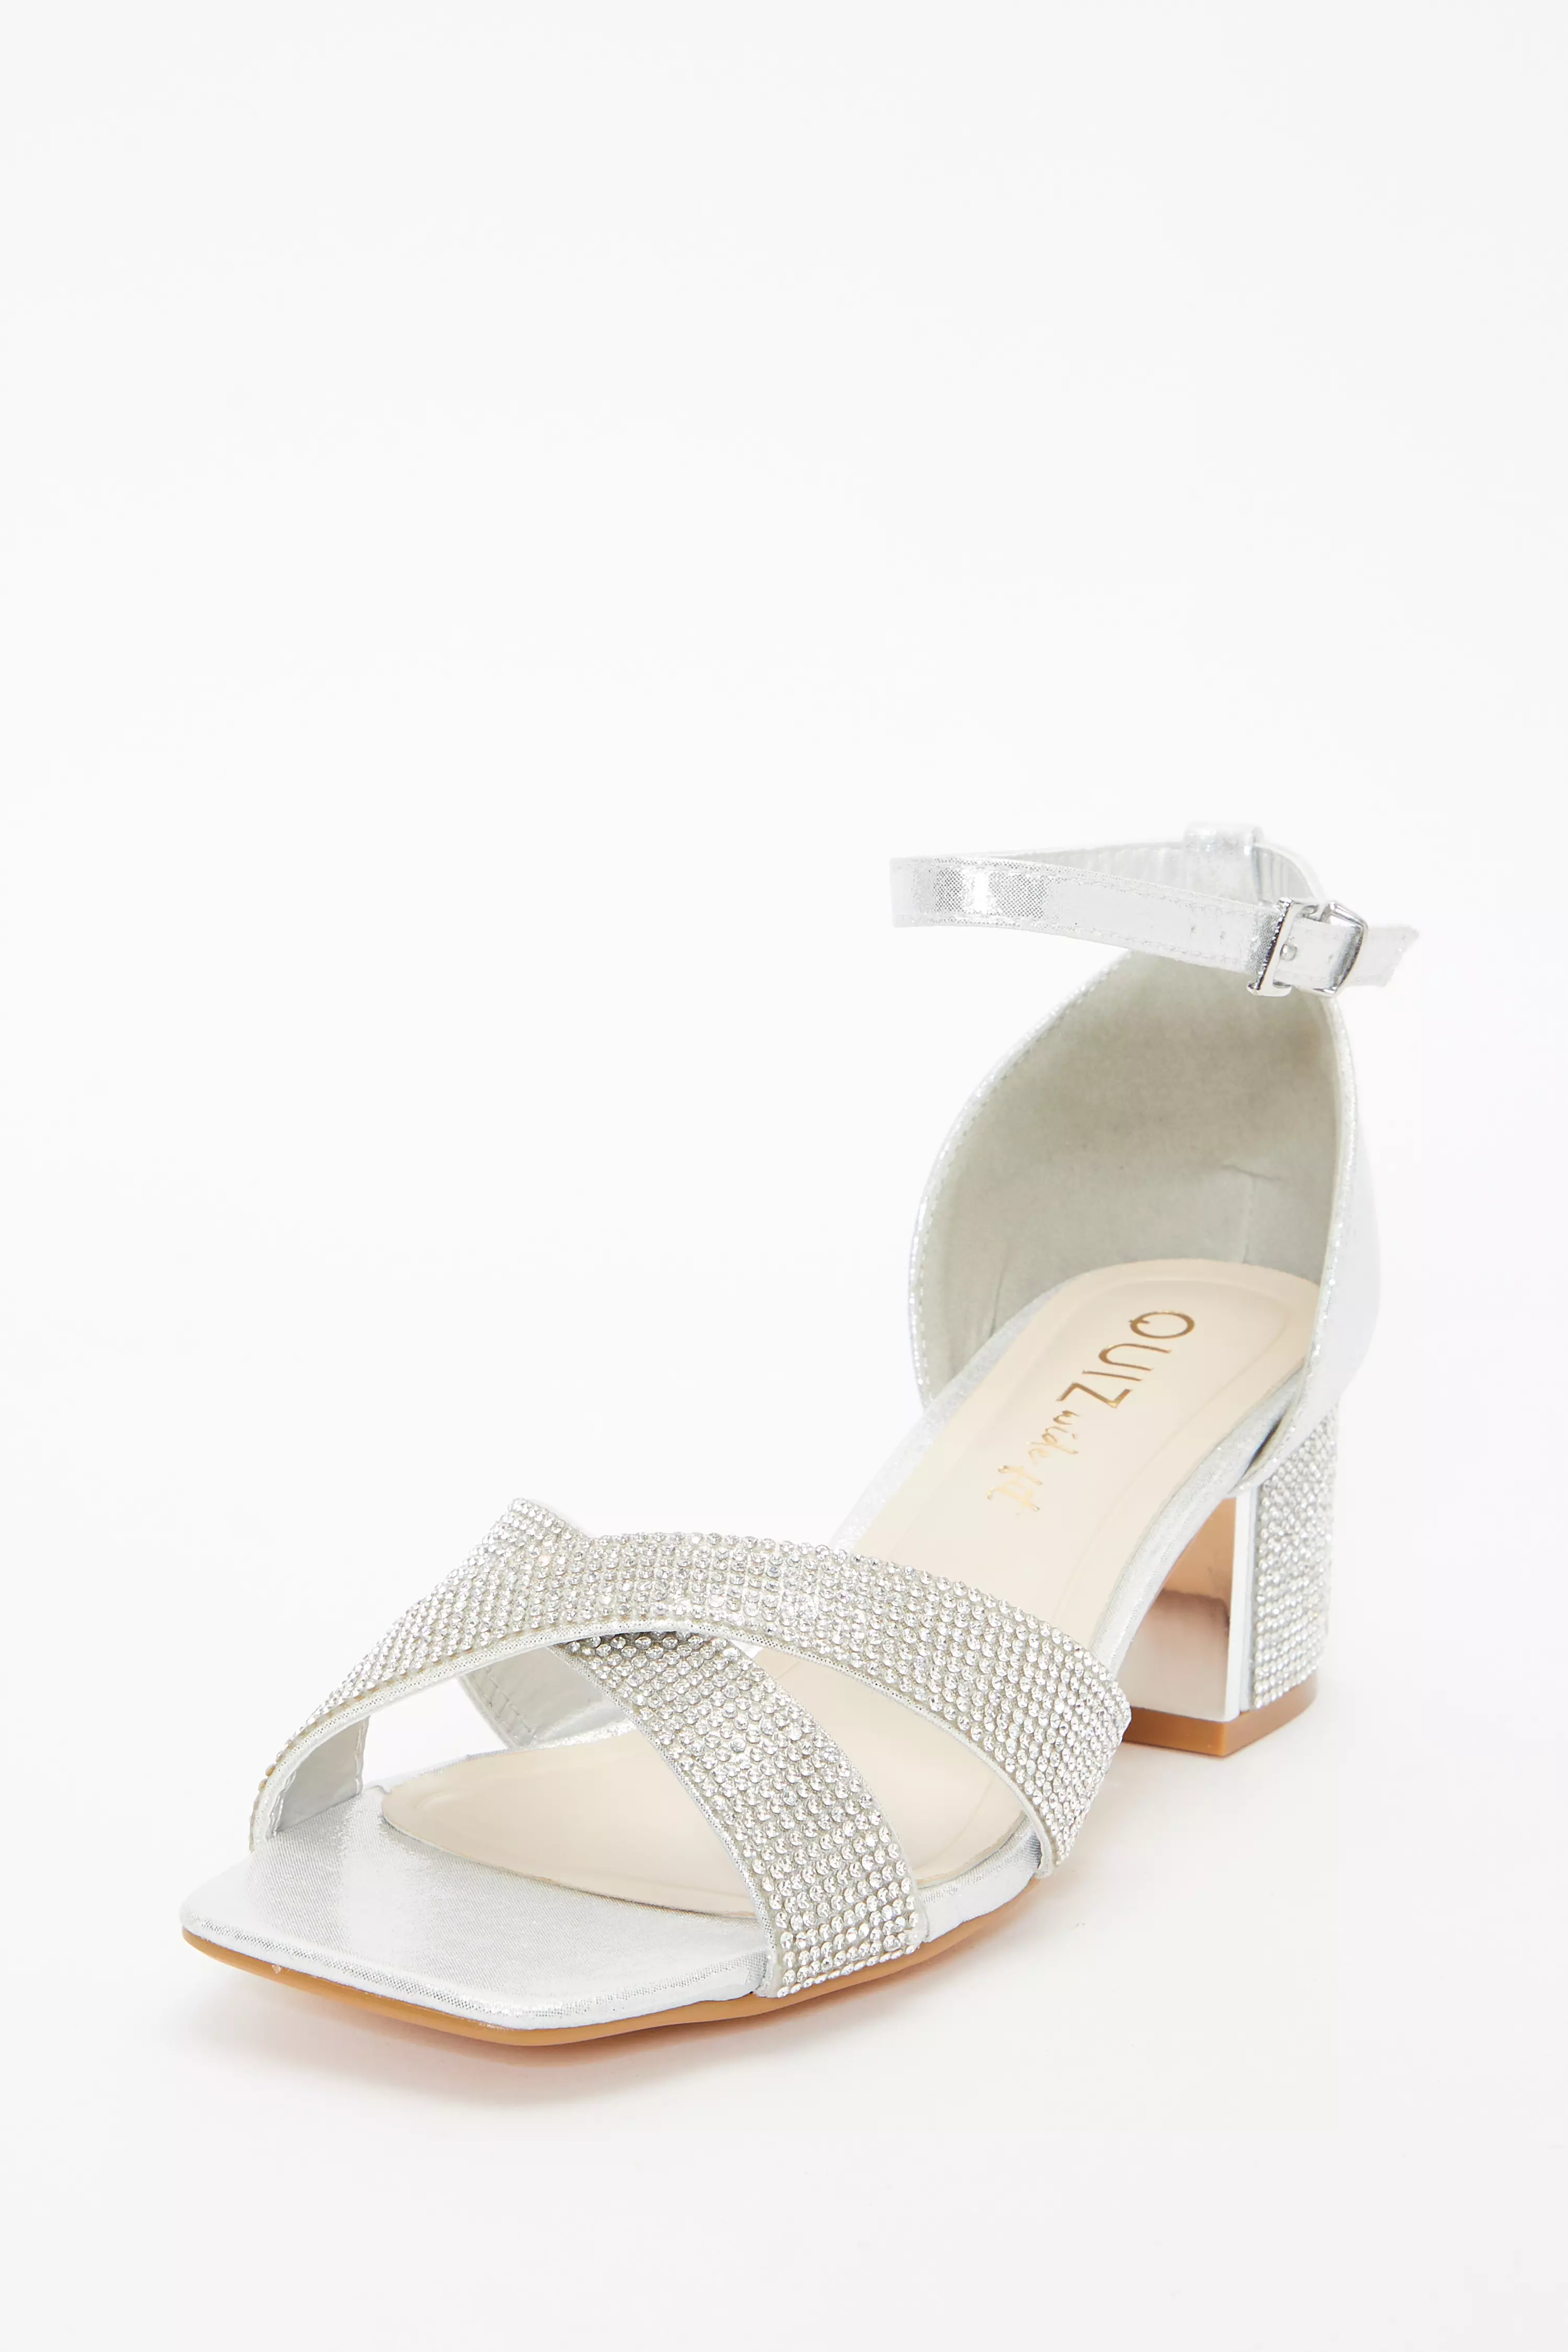 Wide Fit Silver Shimmer Diamante Heeled Sandals - QUIZ Clothing